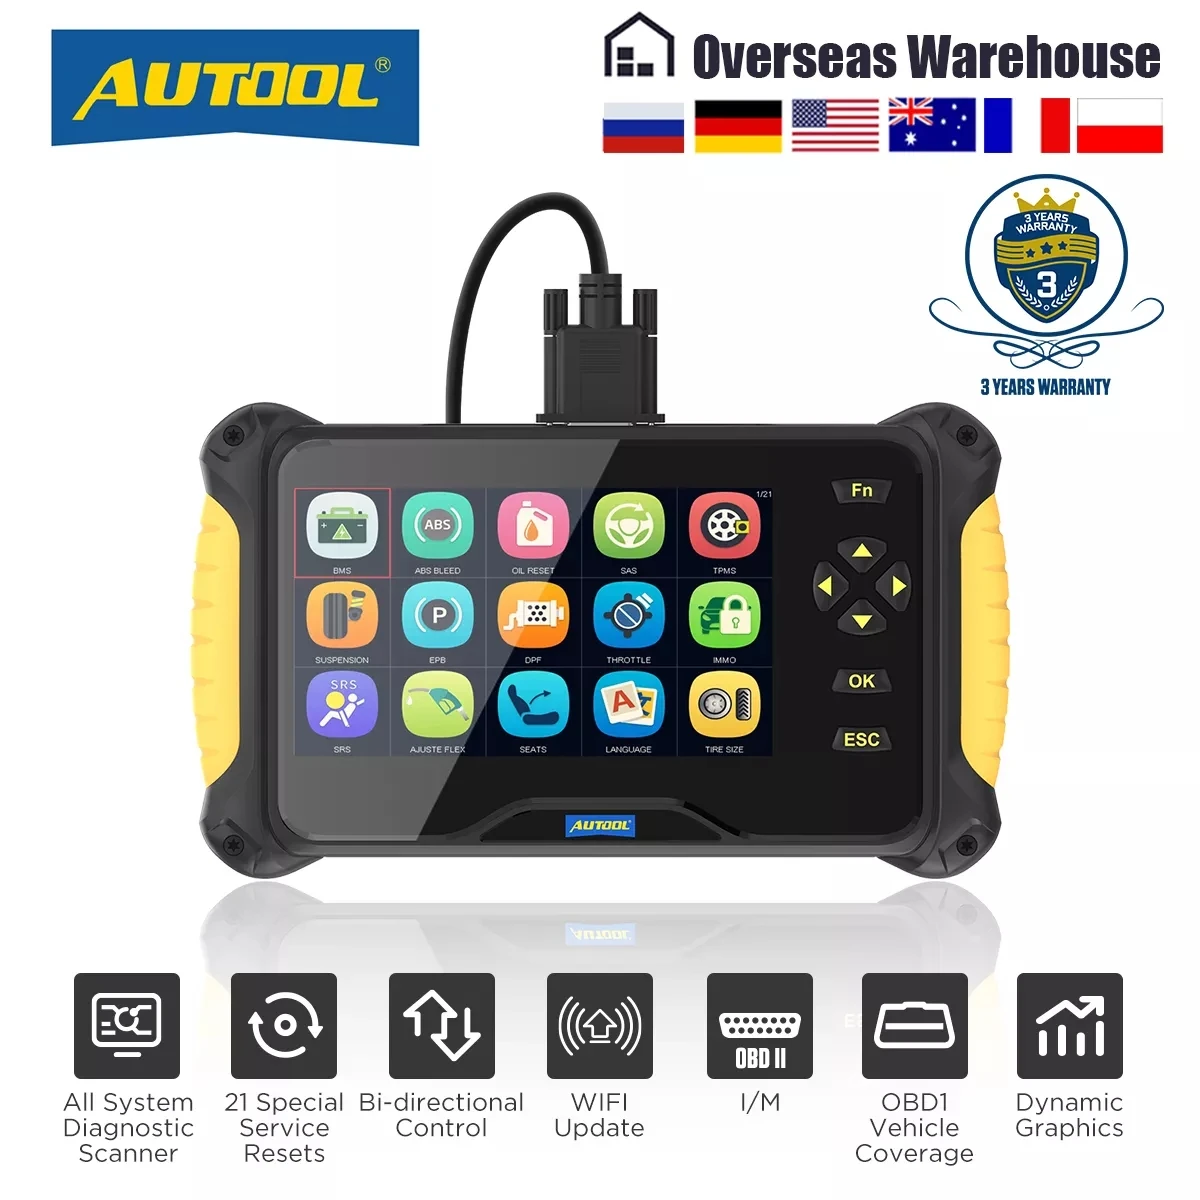 

AUTOOL CS606 Auto OBD2 Scanner OBDII Diagnostic Tools for 21 Resets Engine ABS SRS SAS EPB DPF Head Lamp Code Reader Scan Tool